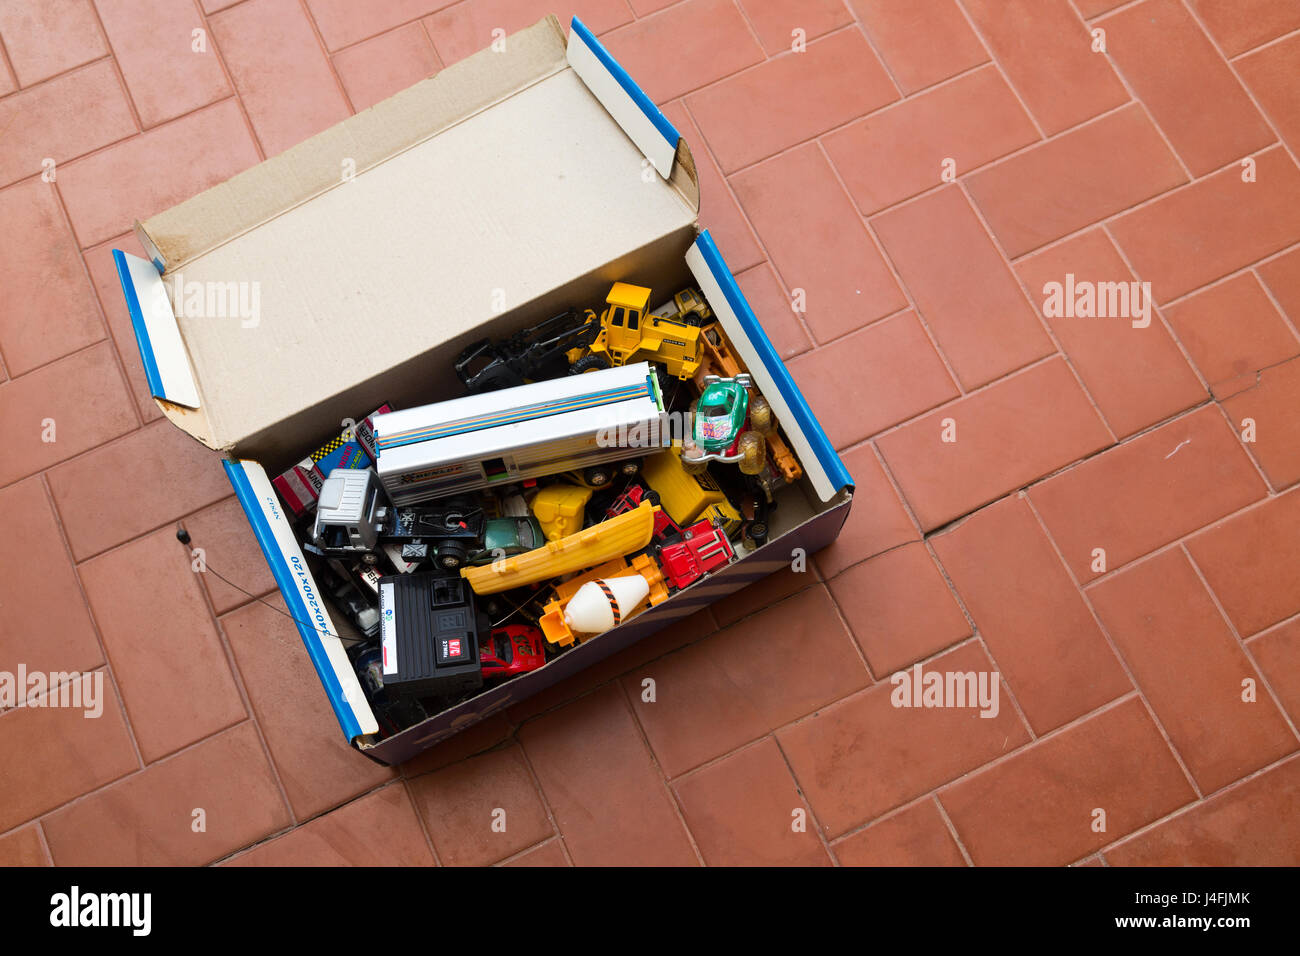 A box of old toys on red tile floor Stock Photo